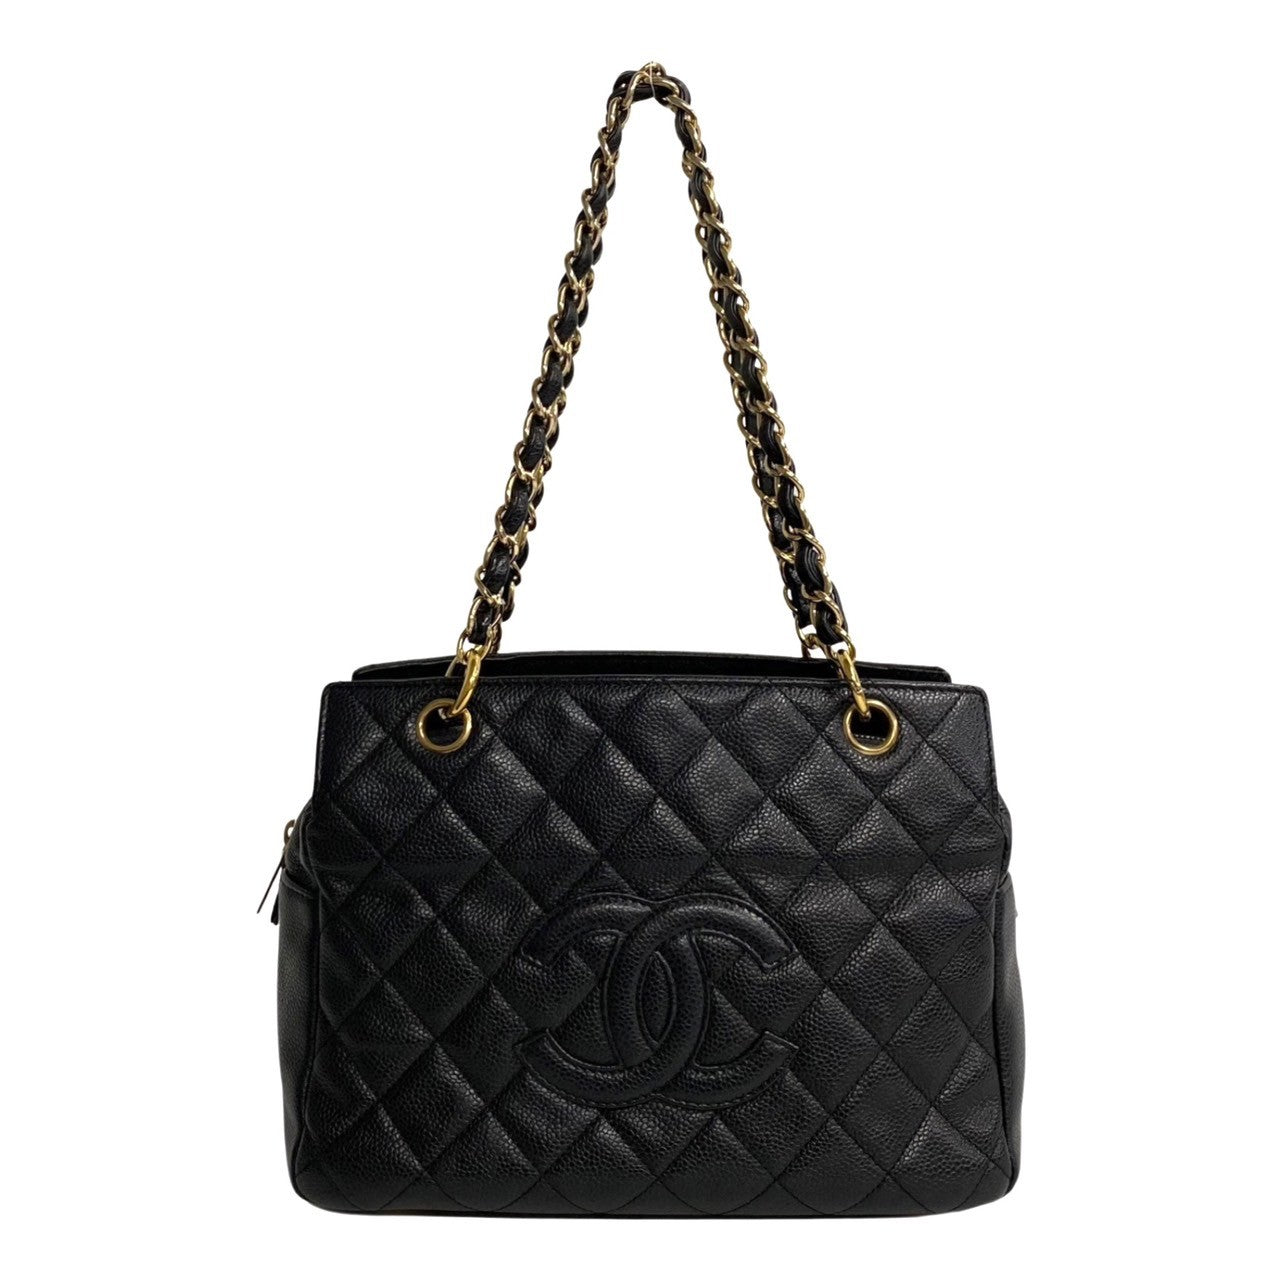 Chanel CC Quilted Caviar Chain Shoulder Bag Leather Shoulder Bag in Good condition